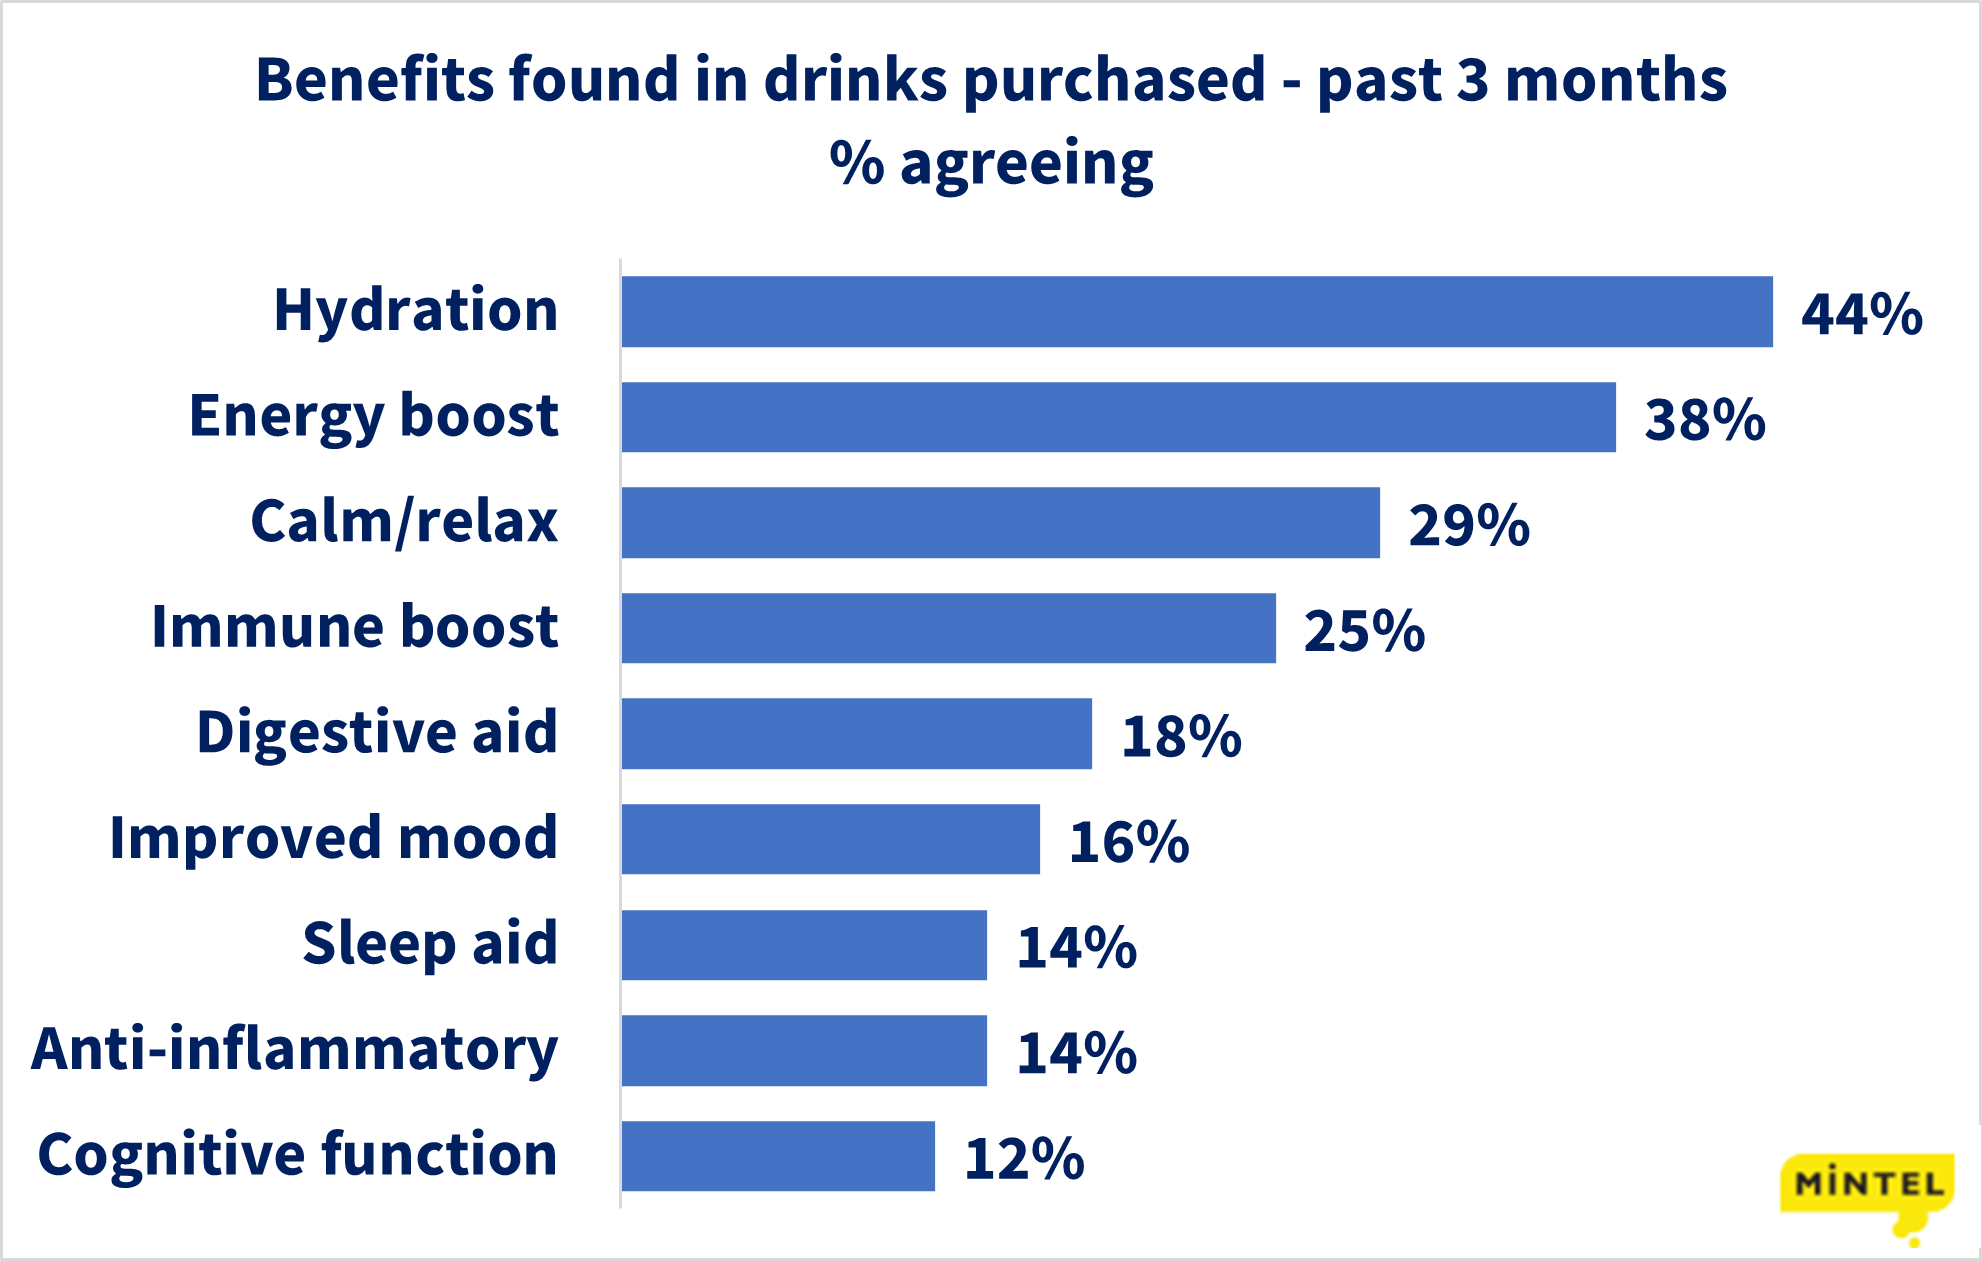 Benefits Found in Purchased Drinks_SSW_Mintel_2021